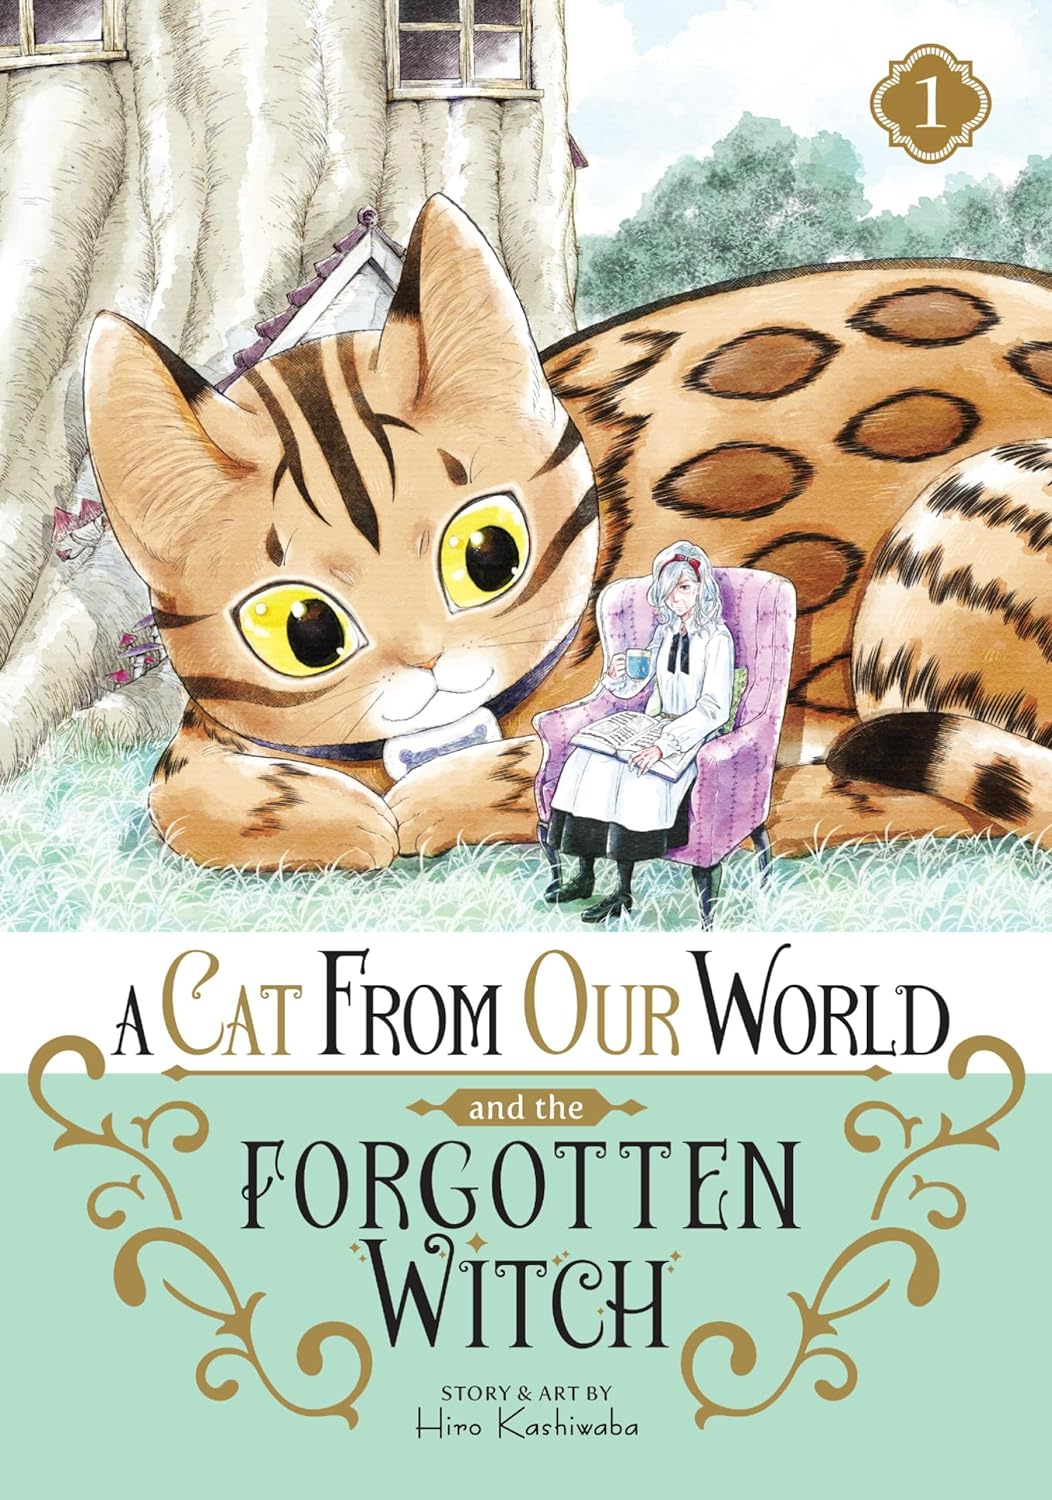 A Cat from Our World and the Forgotten Witch Vol. 01